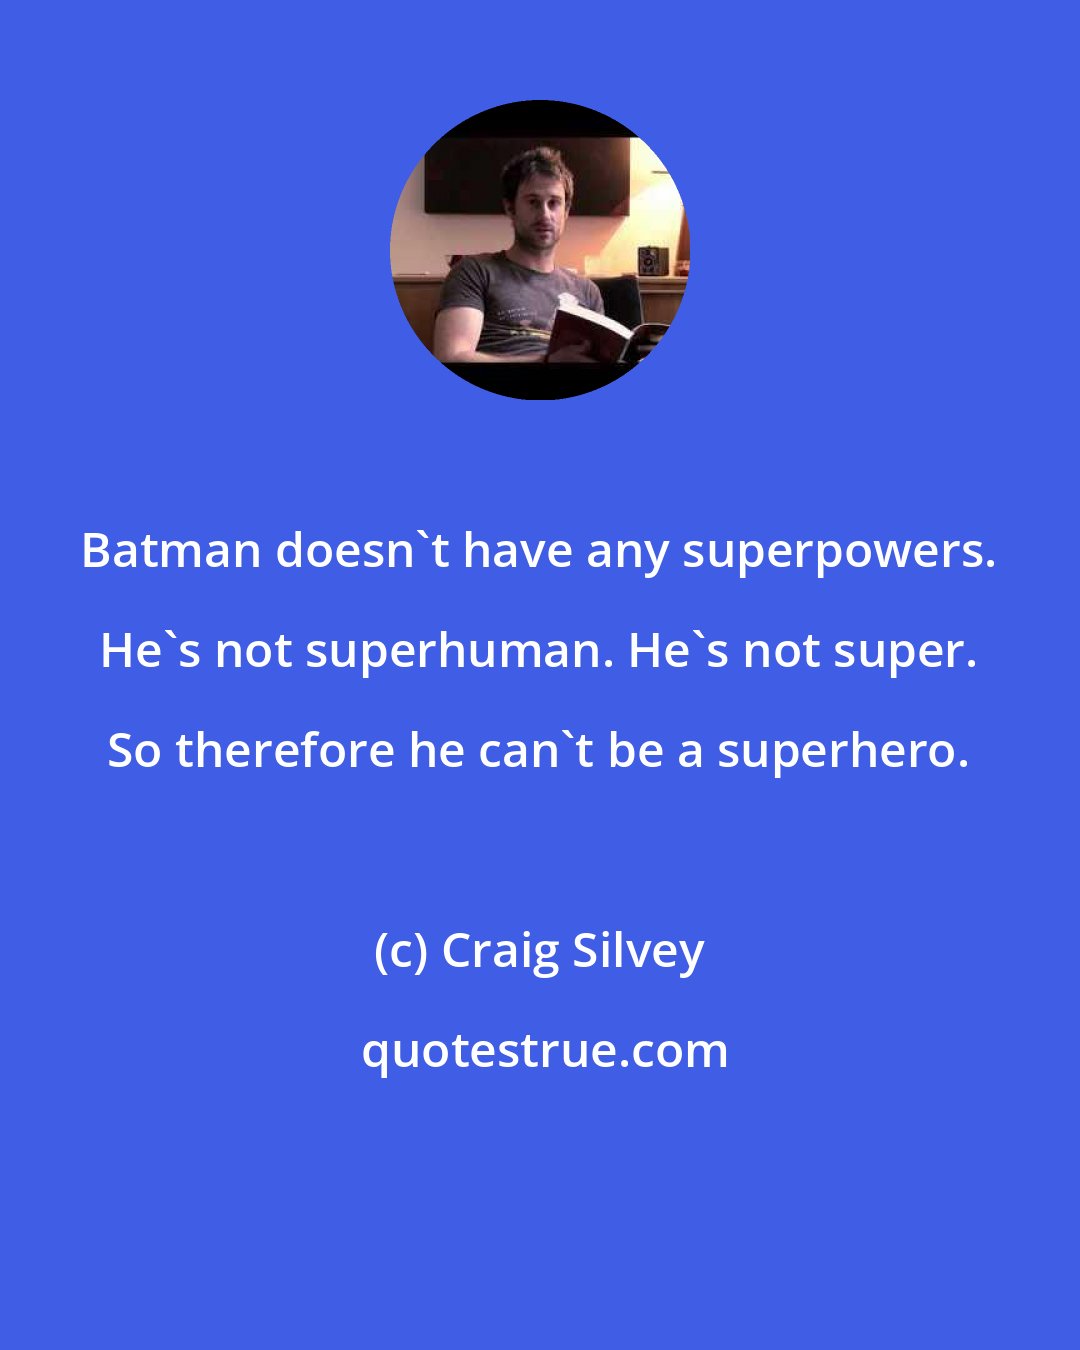 Craig Silvey: Batman doesn't have any superpowers. He's not superhuman. He's not super. So therefore he can't be a superhero.